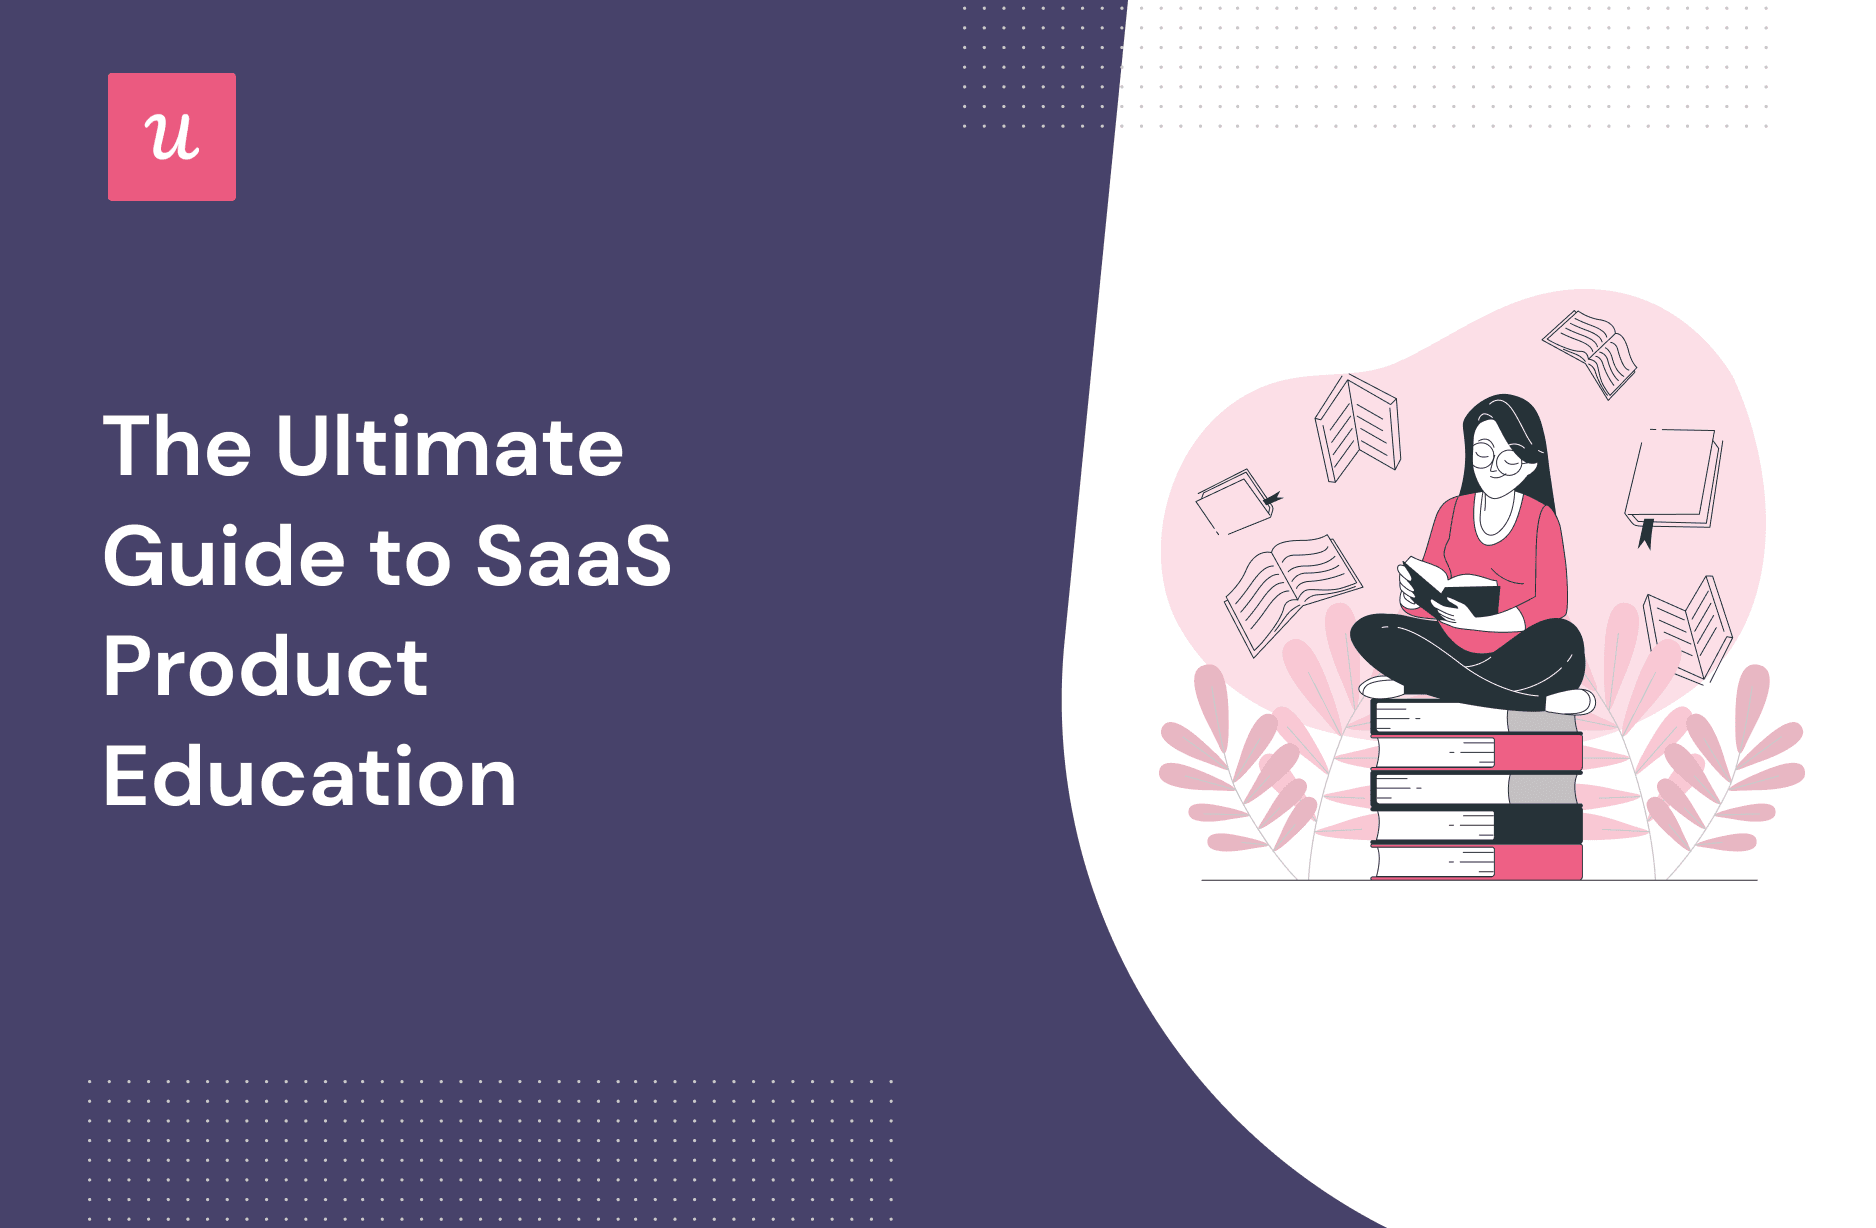 The-SaaS-Software-as-a-Service-Essential-Guide-to-Simplifying-Educational-Operations-across-Every-Schools-Professionals-Theeducationdaily-london-1-1-1.png